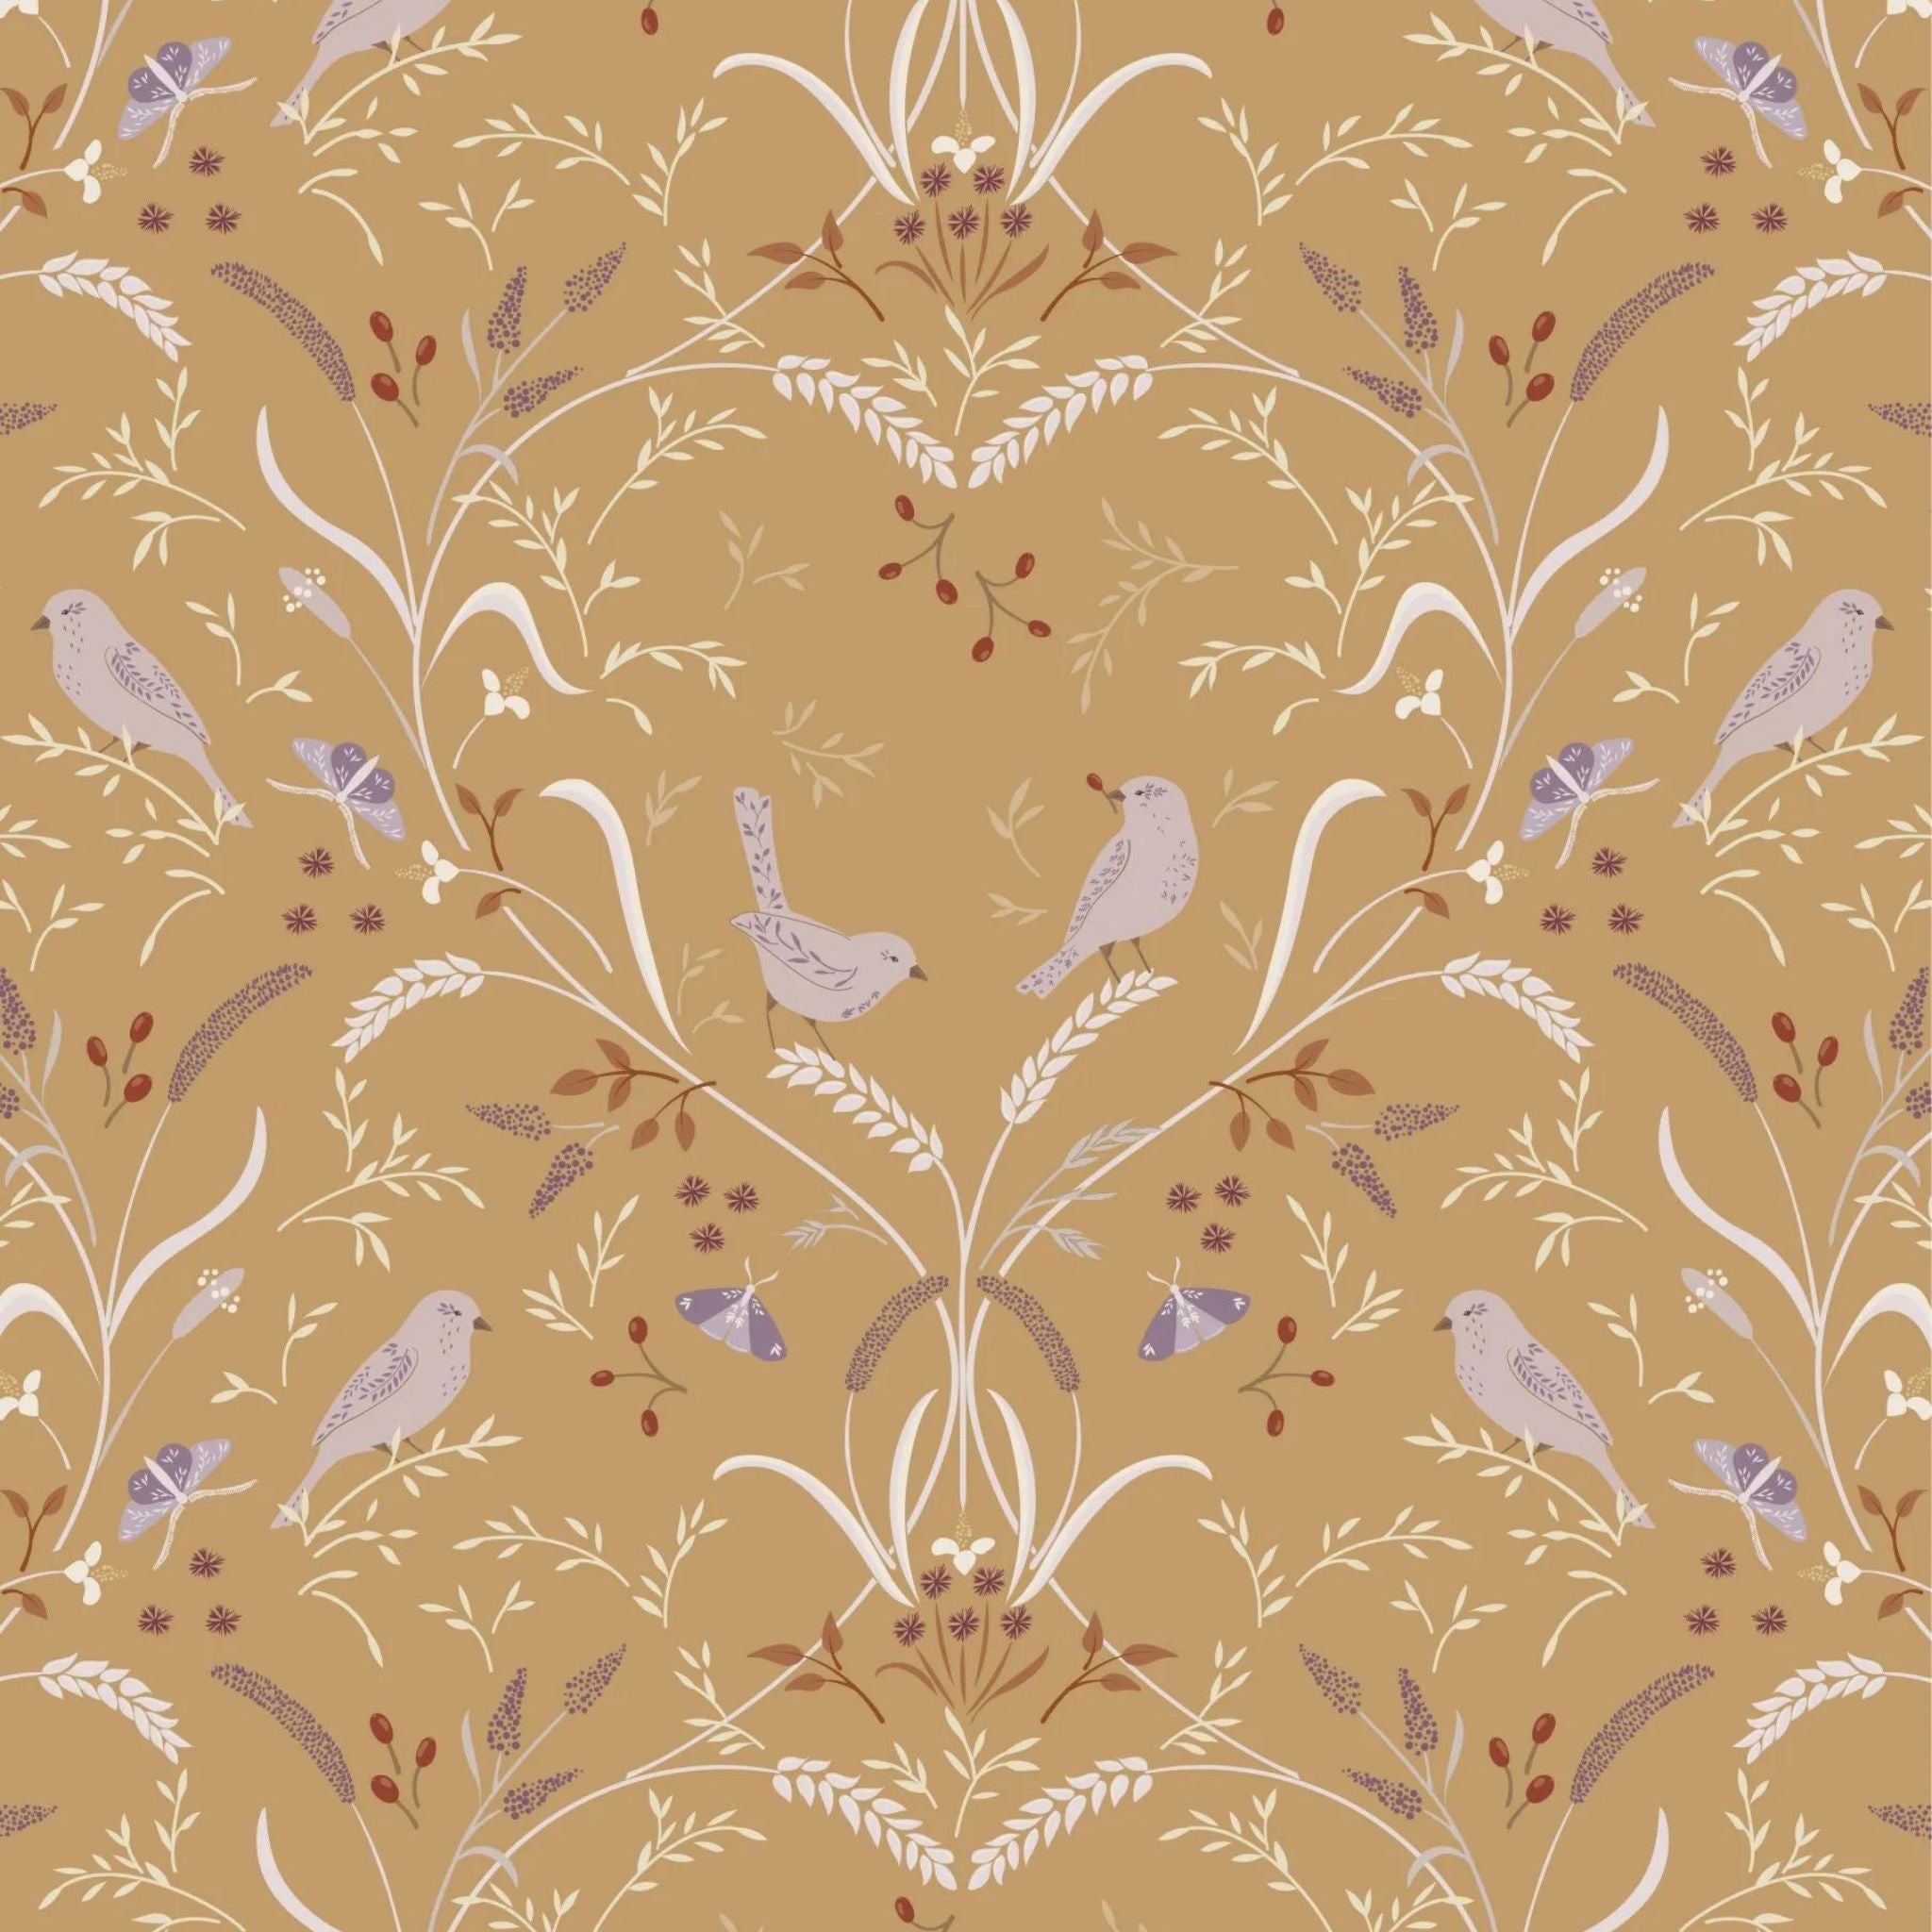 Birds and butterflies on a mustard yellow cotton fabric - Meadowside by Lewis and Irene